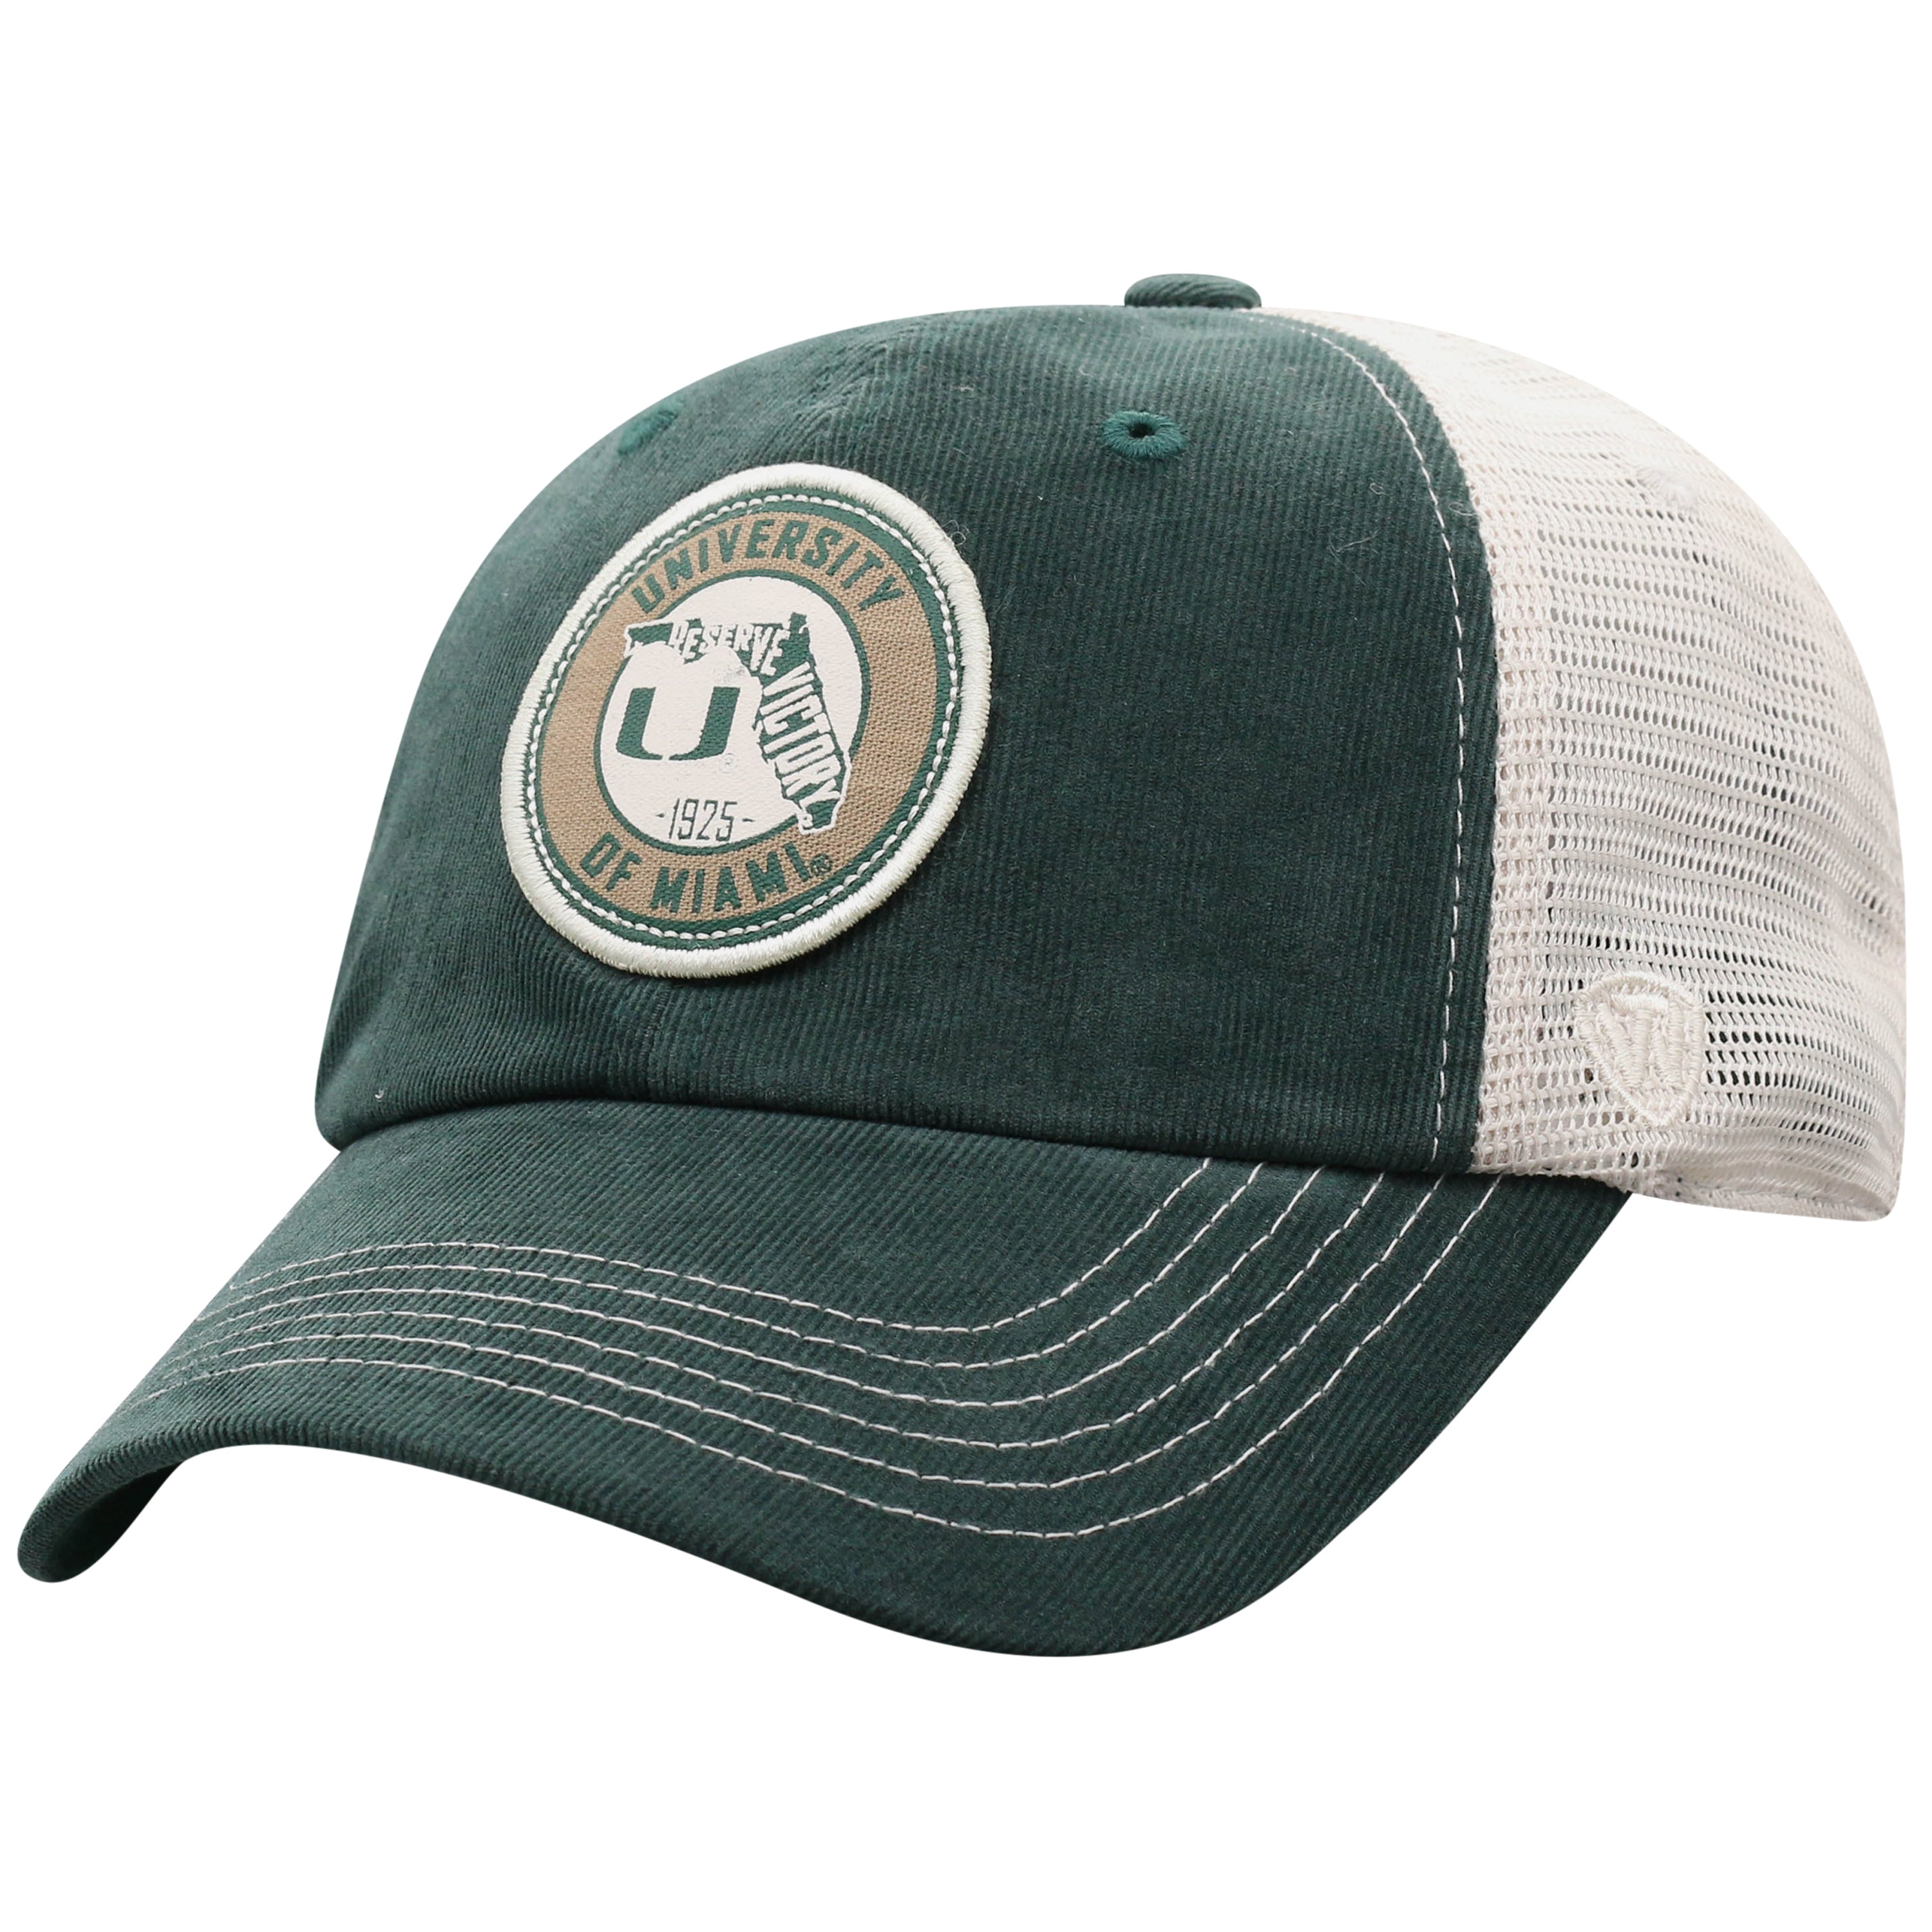 Miami Hurricanes Top of the World Control Adjustable Two-Tone Hat